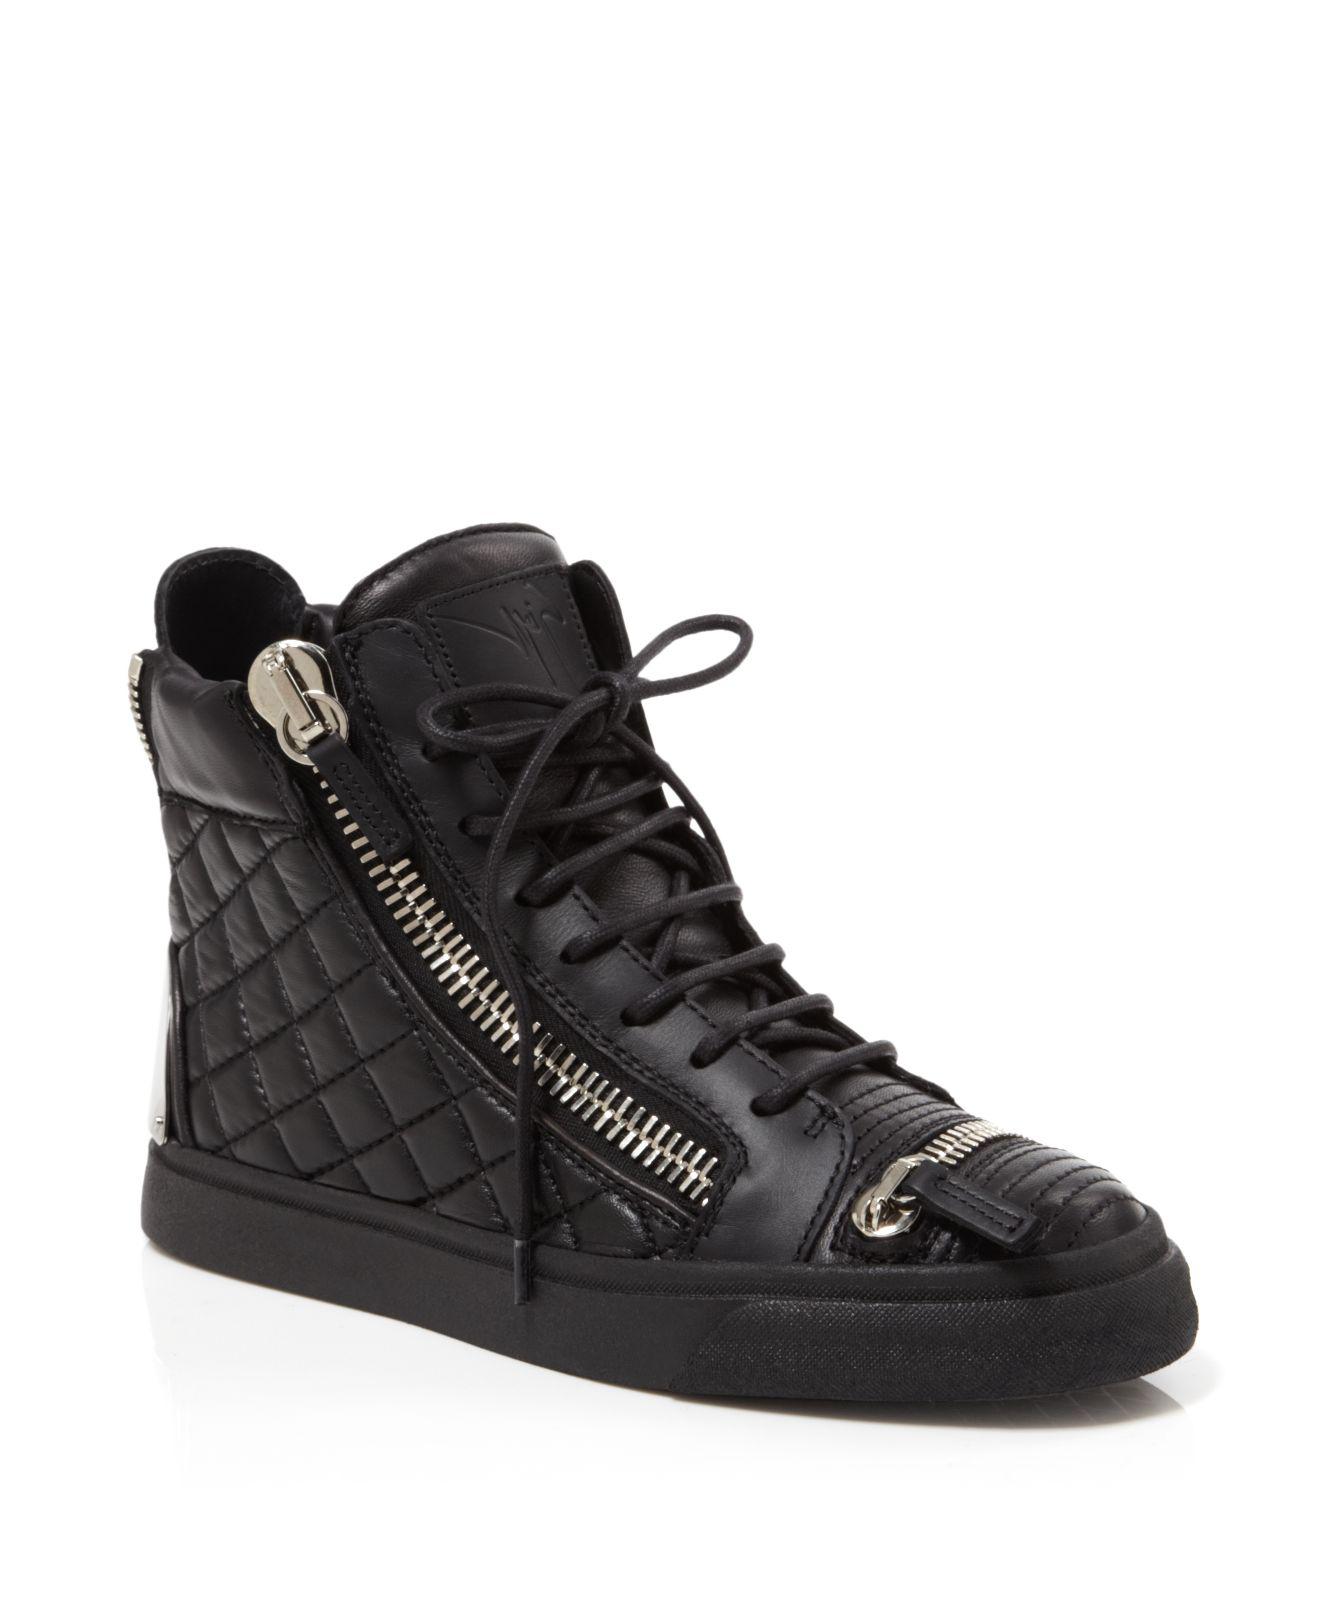 Giuseppe Zanotti Lace Up High Top Sneakers - London Zip Quilted in Nero  (Black) - Lyst